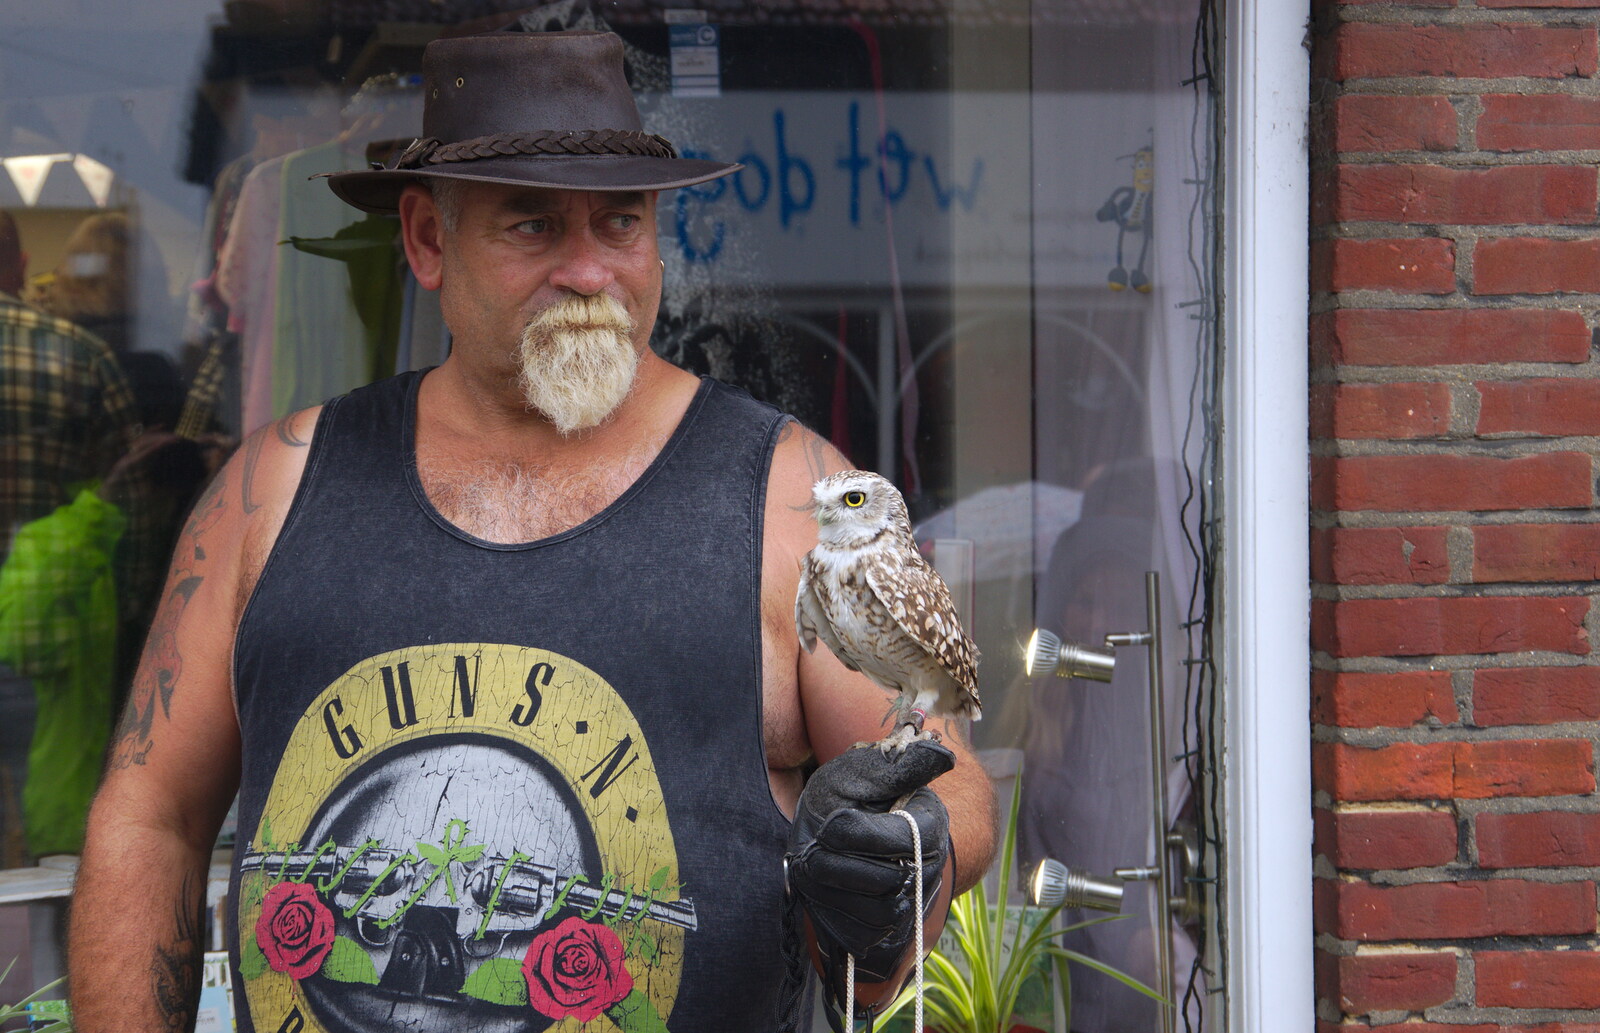 On Fore Street, there's a dude with a small owl from Kelling Camping and the Potty Morris Festival, Sheringham, North Norfolk - 6th July 2019